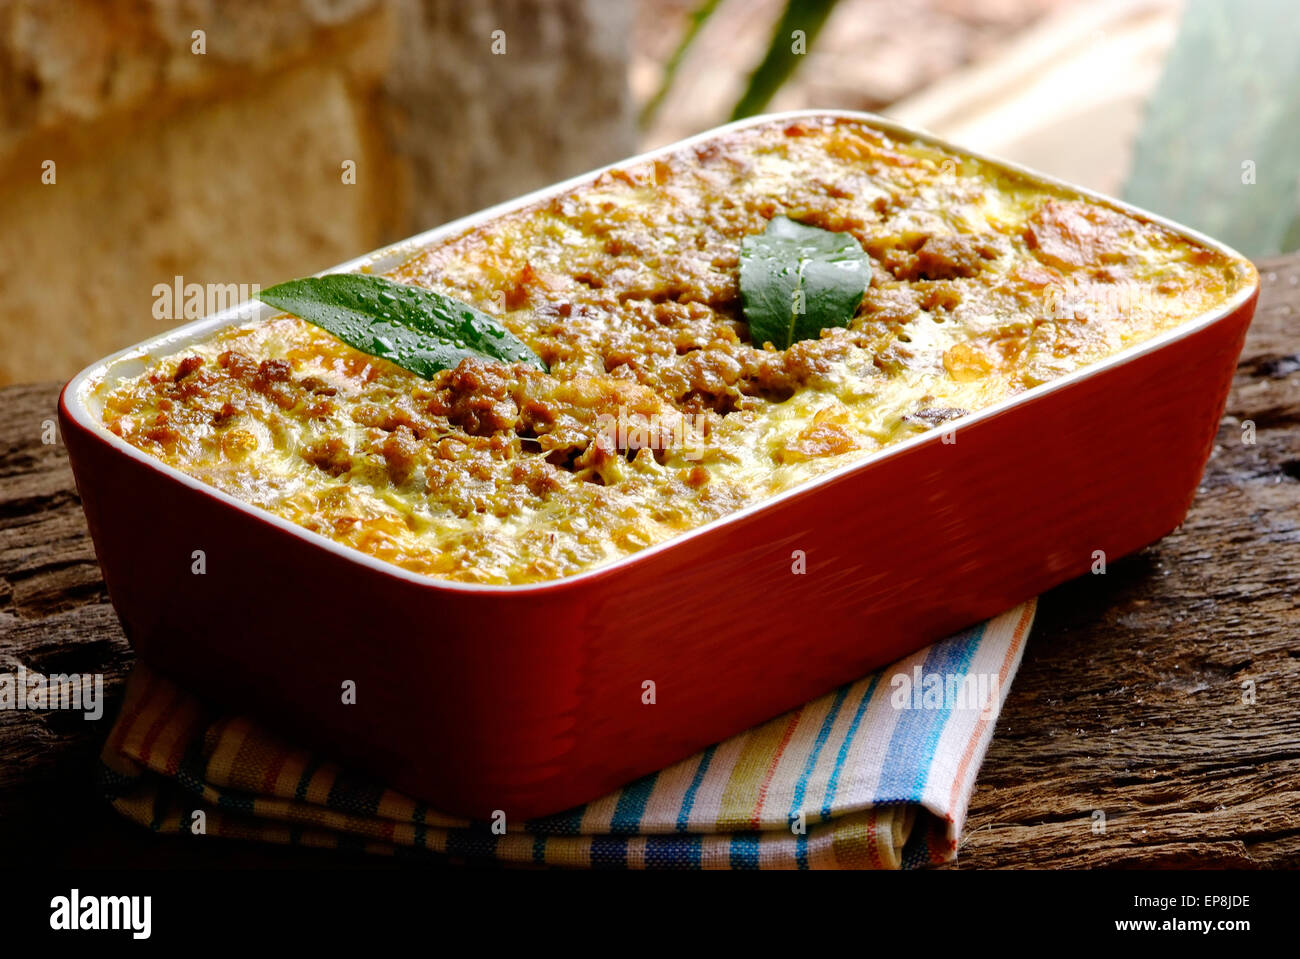 Bobotie is a truly South African meal brought to the Cape of Good Hope ...